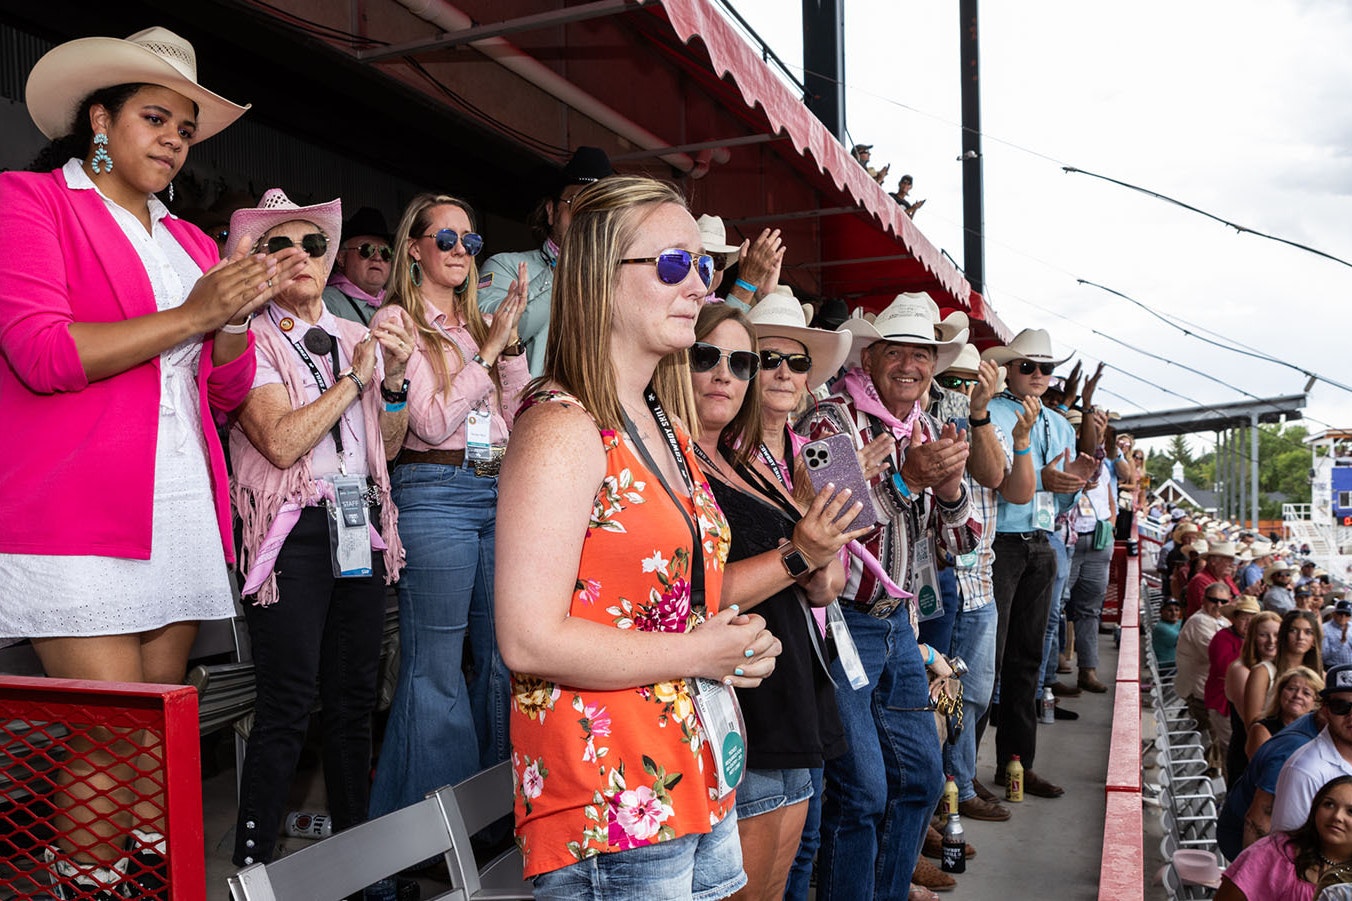 Rawlins EMT Tiffany Gruetzmacher was given two standing ovations by 10,000 people at Cheyenne Frontier Days on Thursday, honored as a hometown hero.